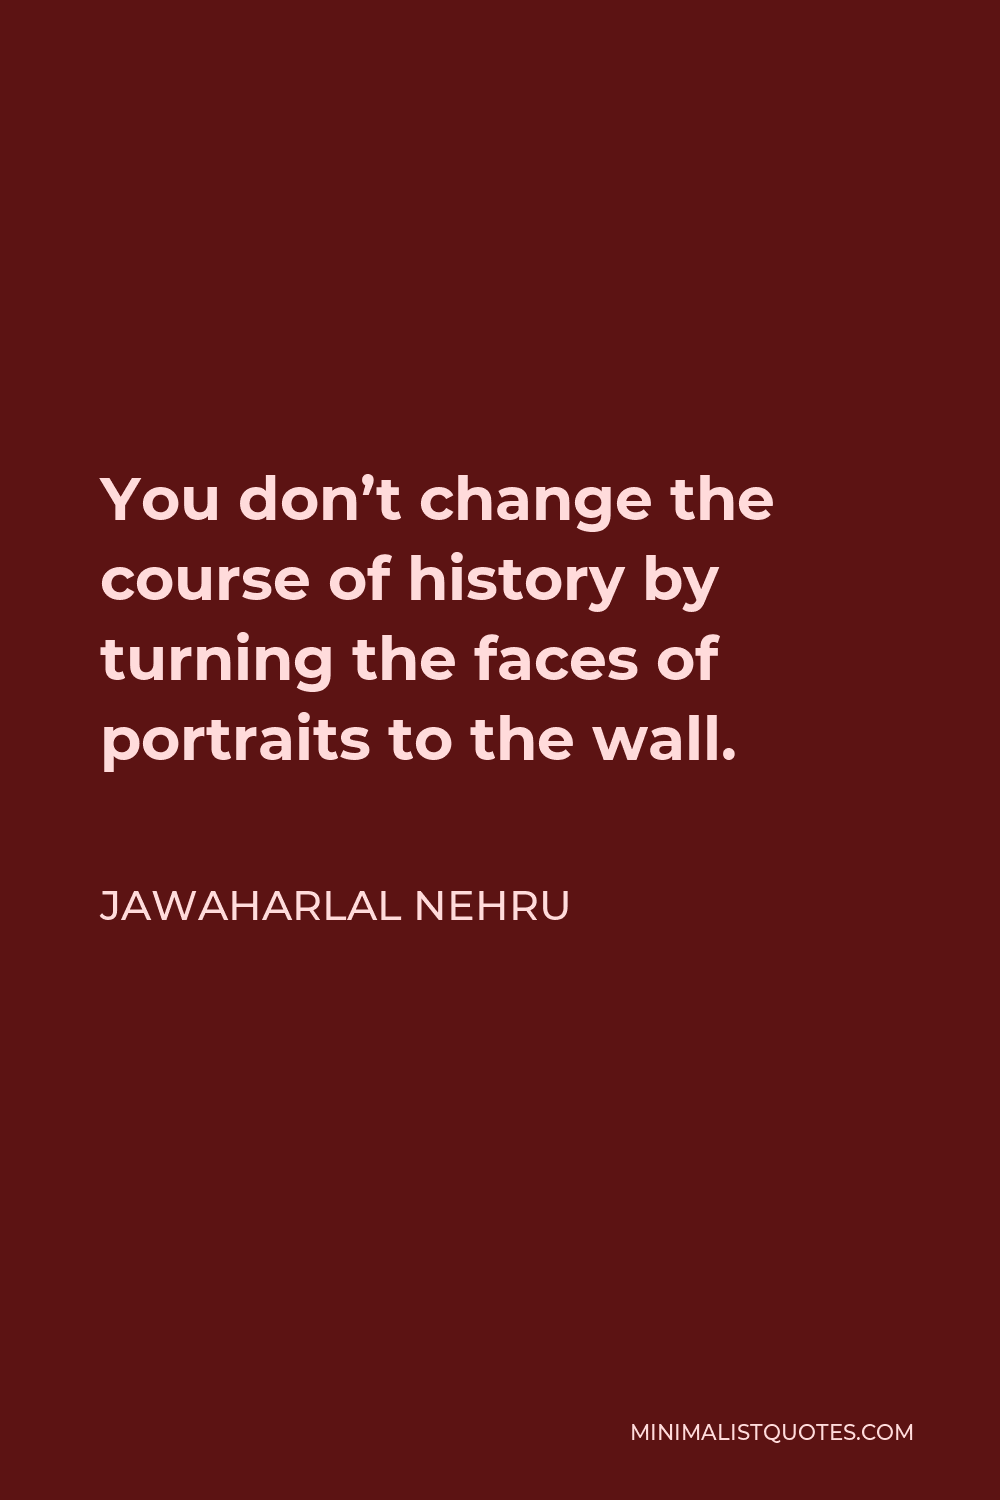 Jawaharlal Nehru Quote - You don’t change the course of history by turning the faces of portraits to the wall.